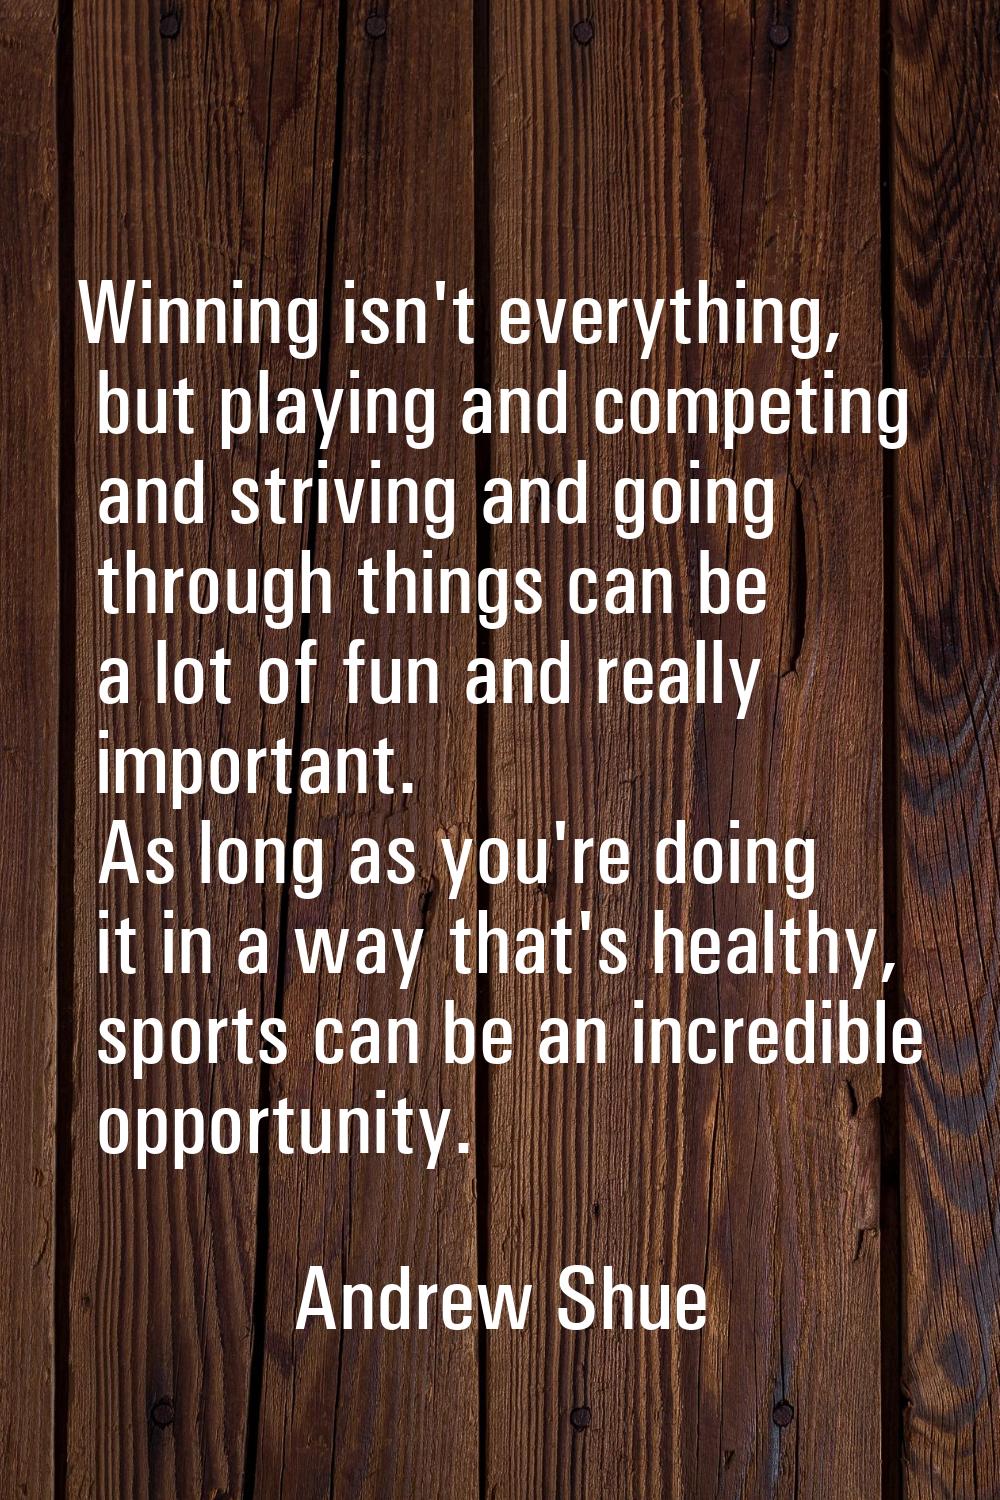 Winning isn't everything, but playing and competing and striving and going through things can be a 